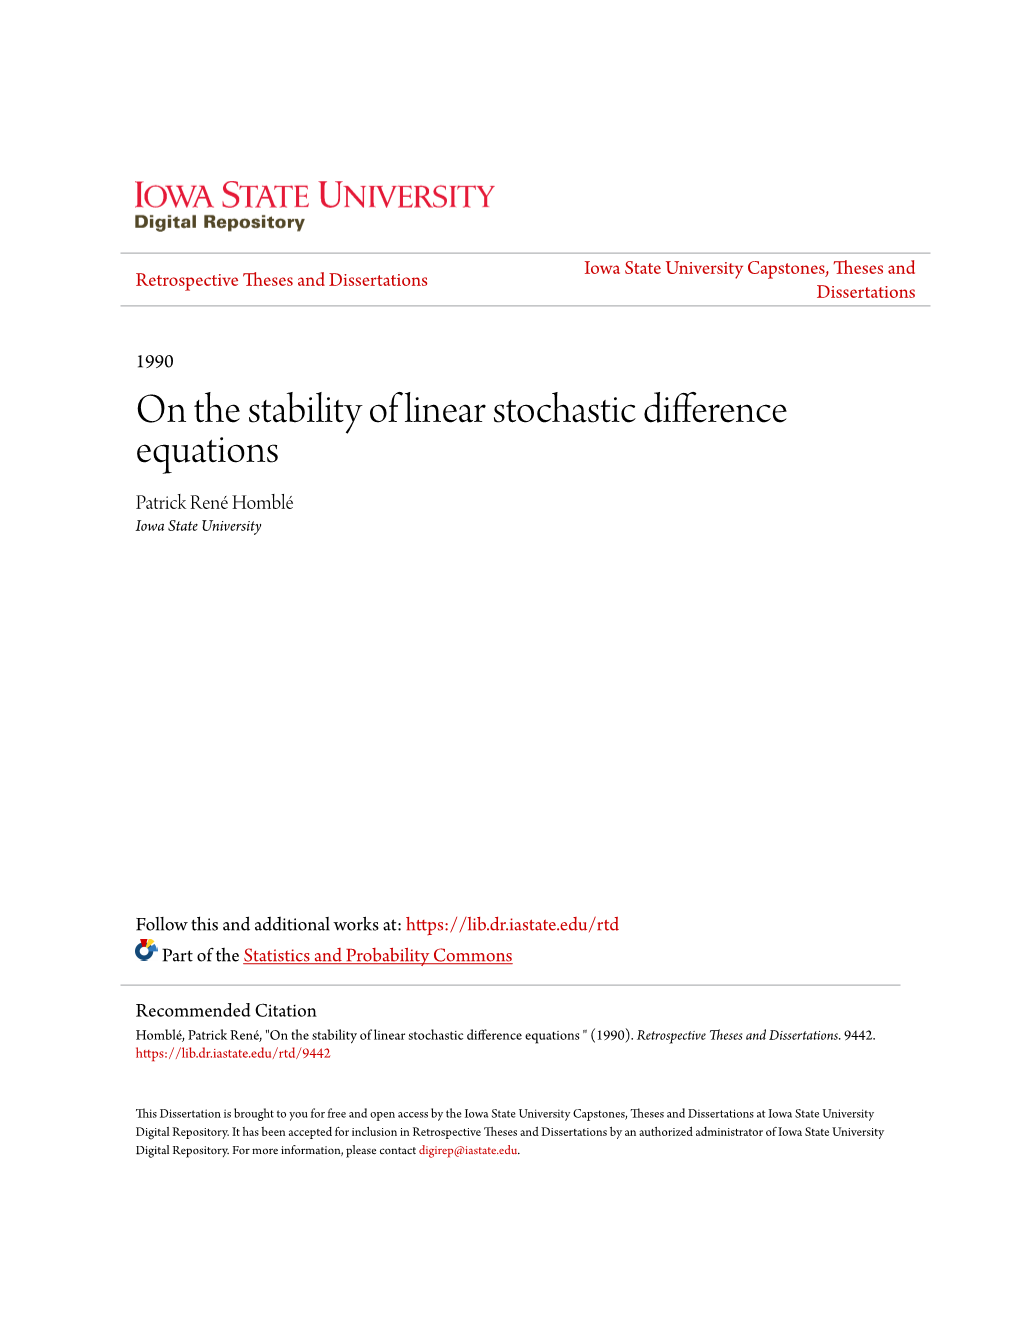 On the Stability of Linear Stochastic Difference Equations Patrick René Homblé Iowa State University